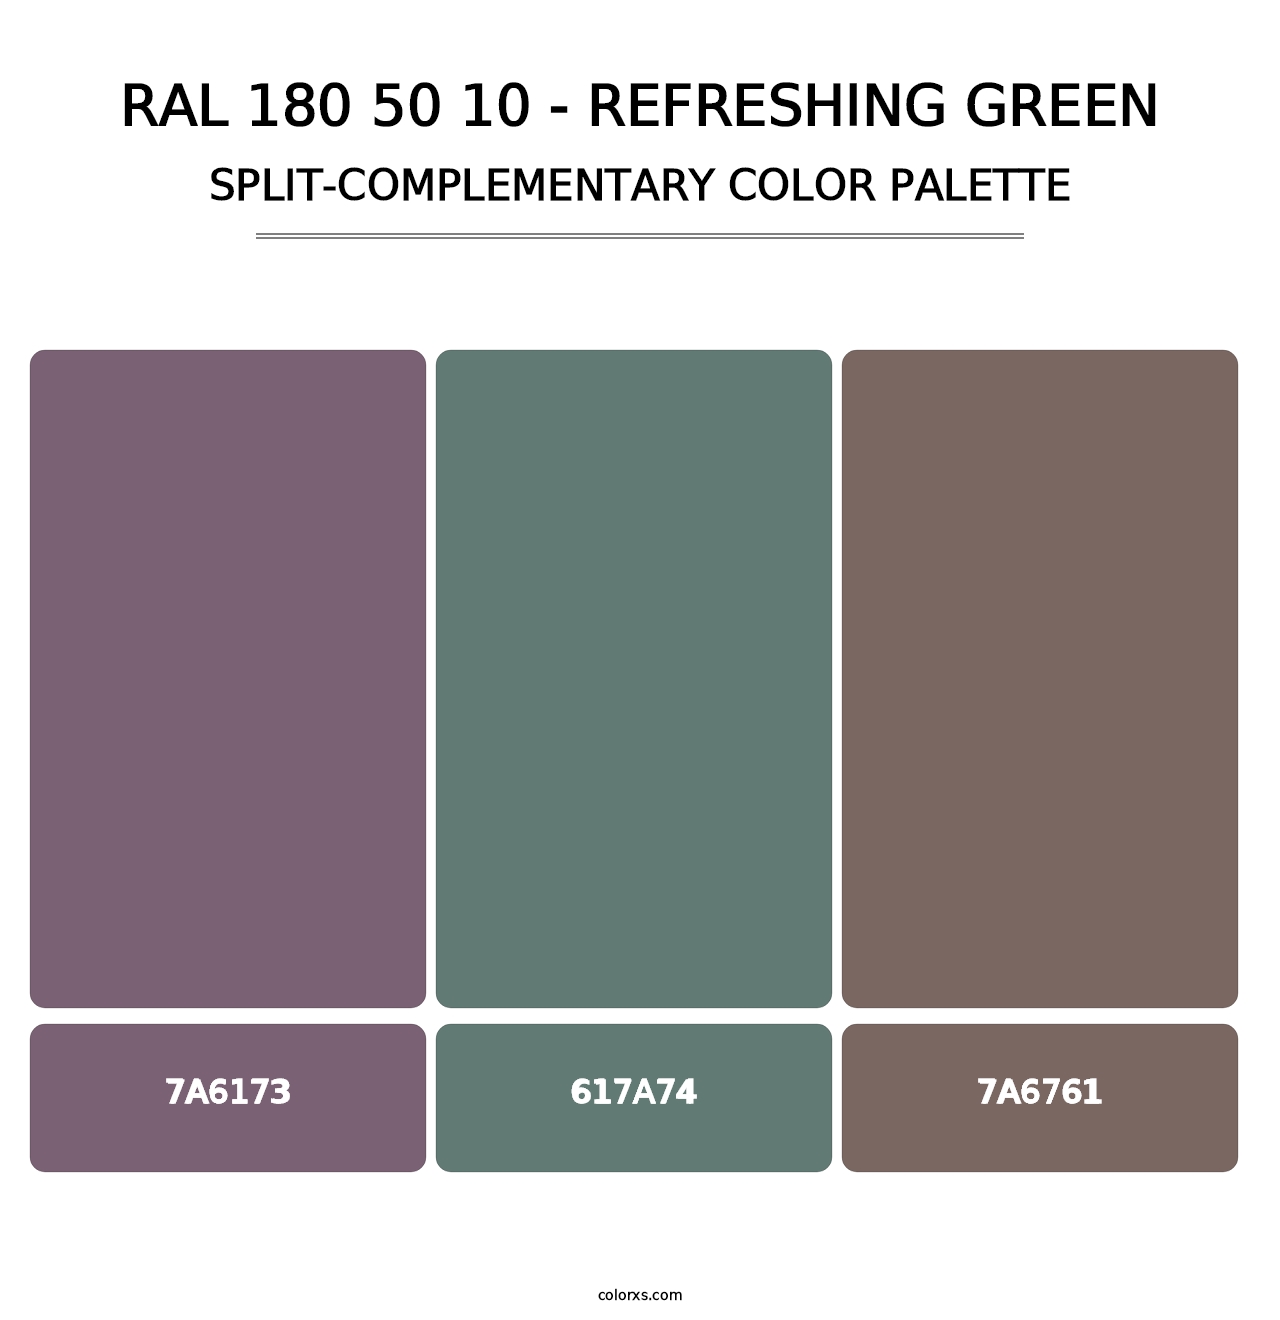 RAL 180 50 10 - Refreshing Green - Split-Complementary Color Palette